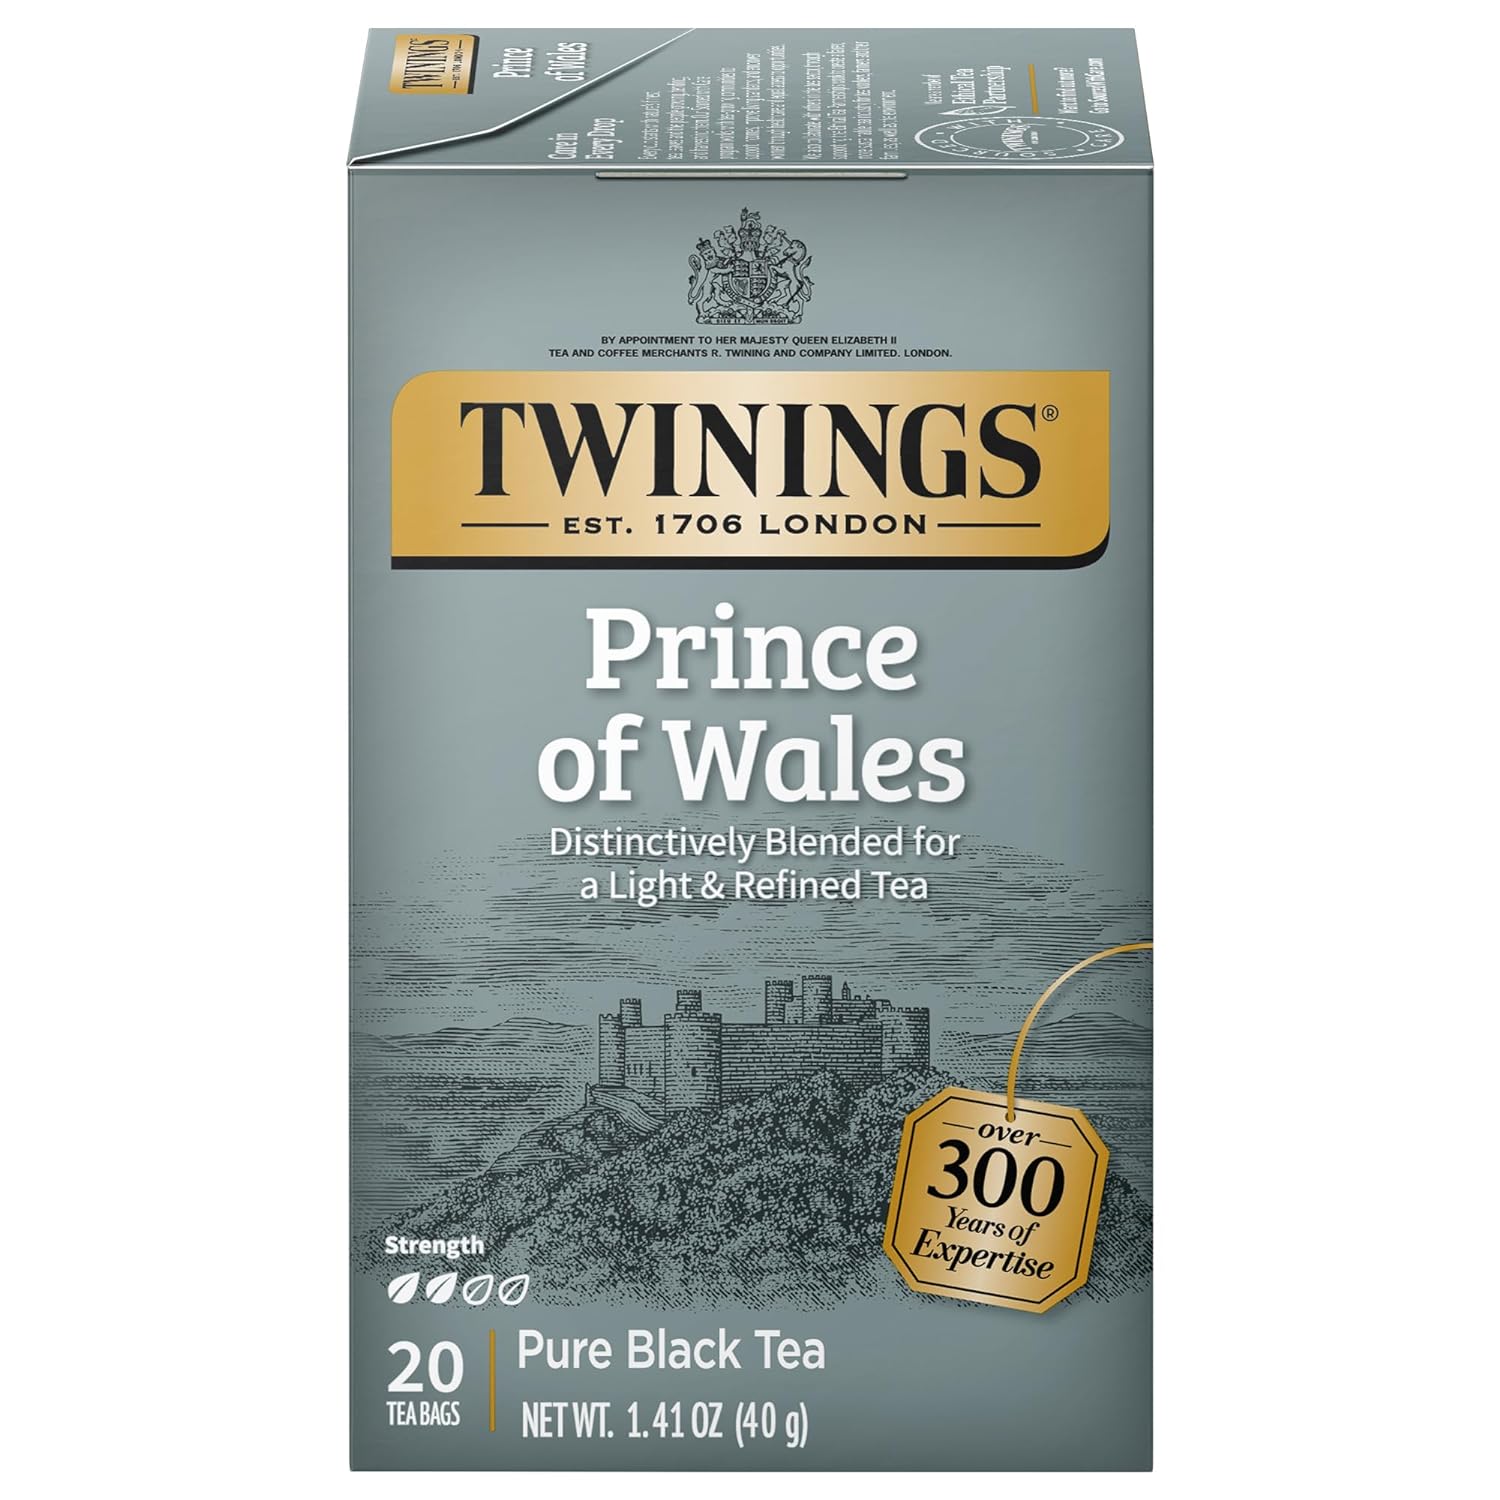 Twinings Prince of Wales tea 20 Count (Pack of 6) $7.34 or Assorted Herbal tea 20 Count (Pack of 6) $9.53 Amazon